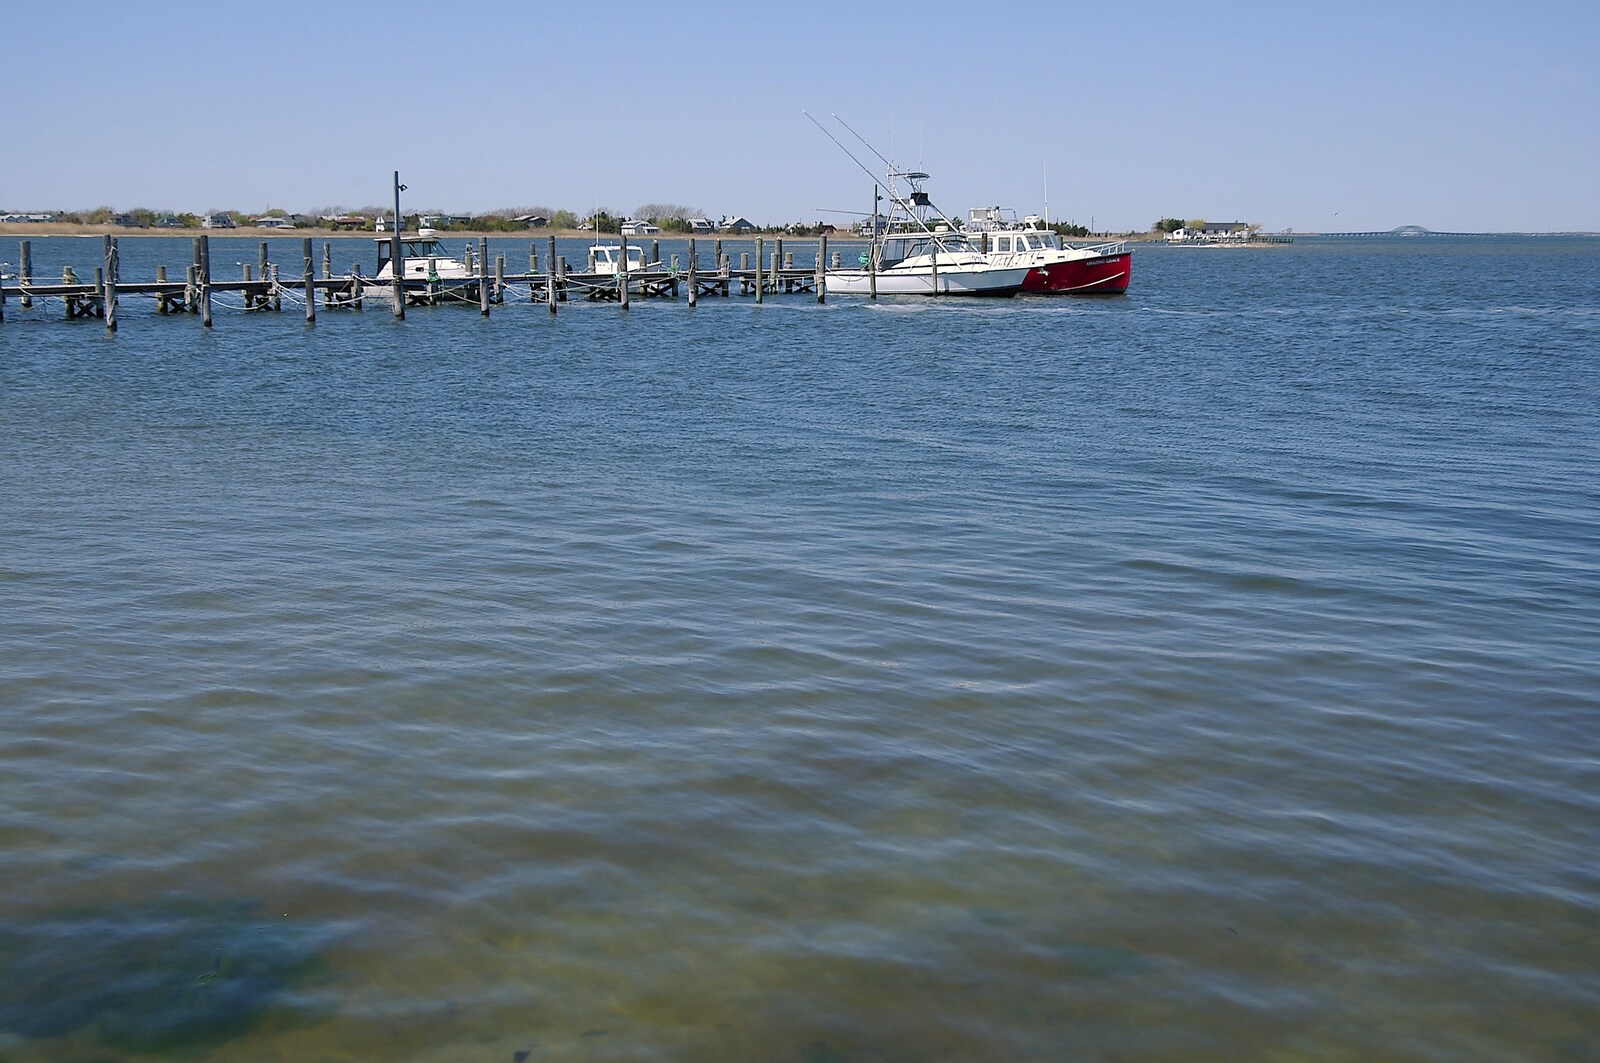 Fishing boats on the pier from Phil and the Fair Harbor Fire Engine, Fire Island, New York State, US - 30th April 2006